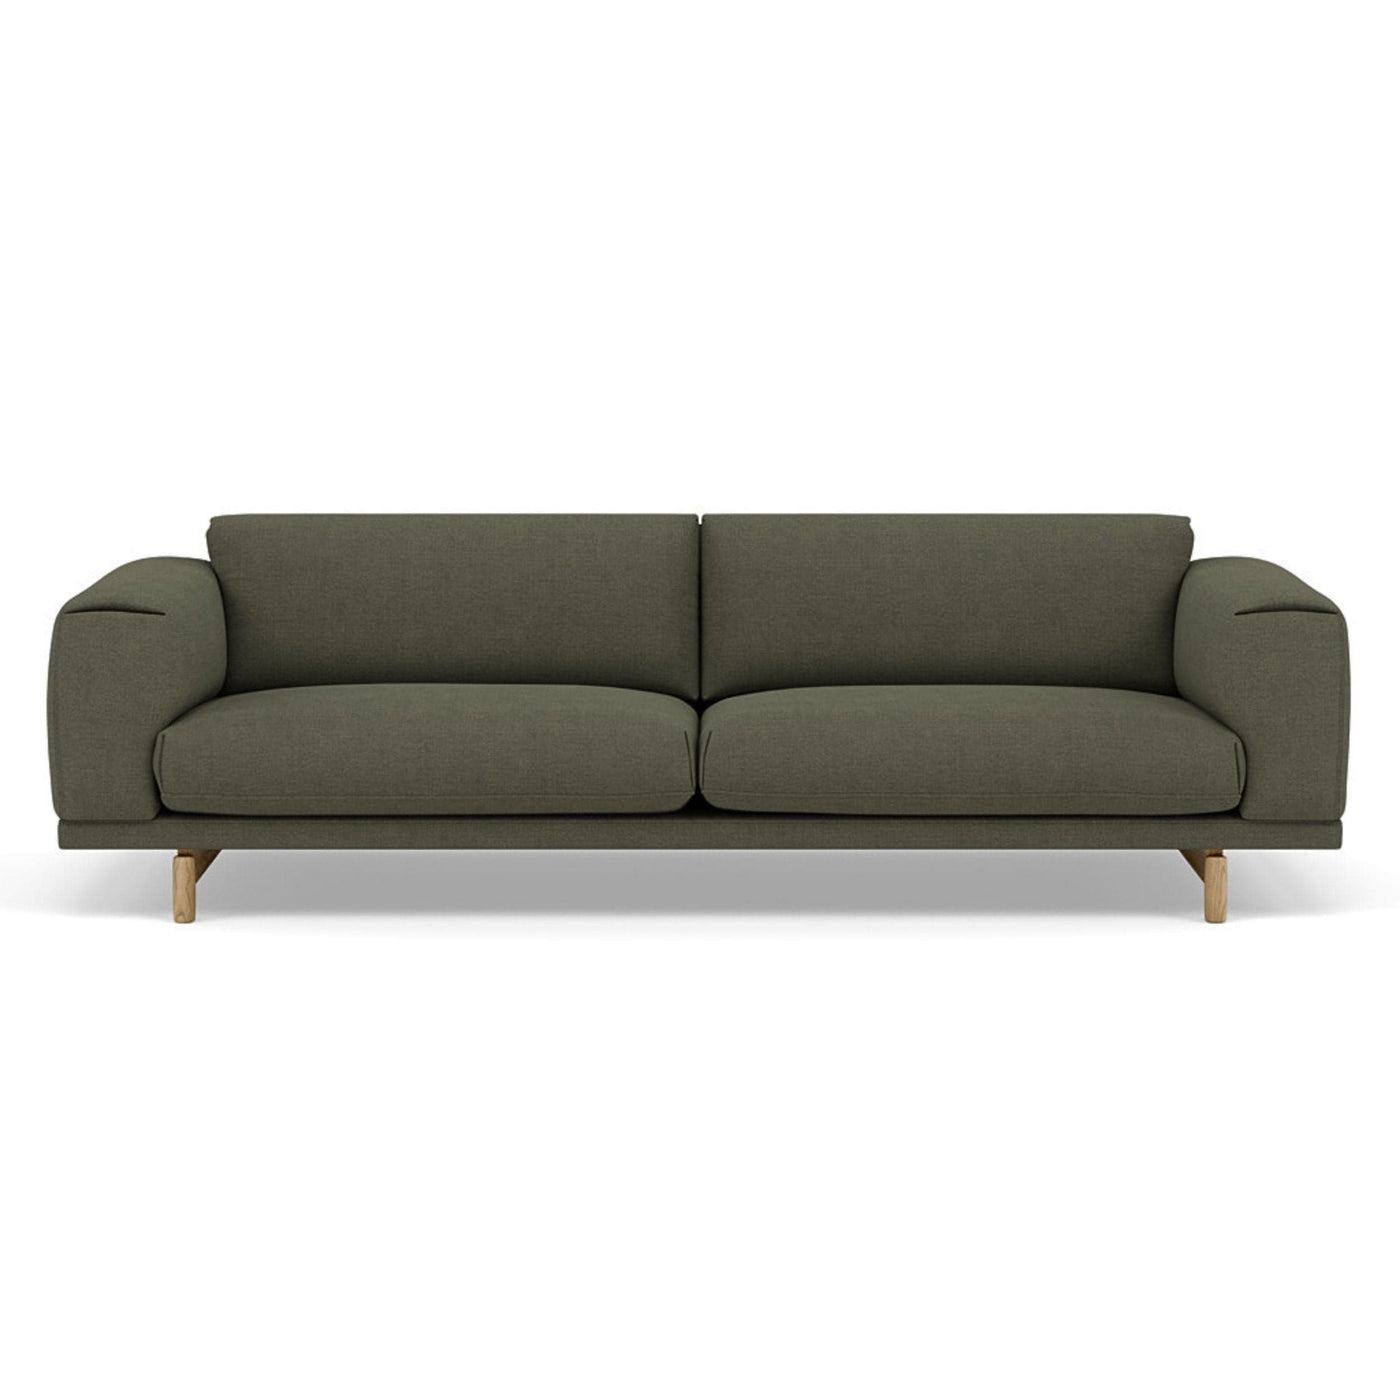 Muuto Rest Sofa Fiord 961 fabric. Made to order from someday designs. #colour_fiord-961